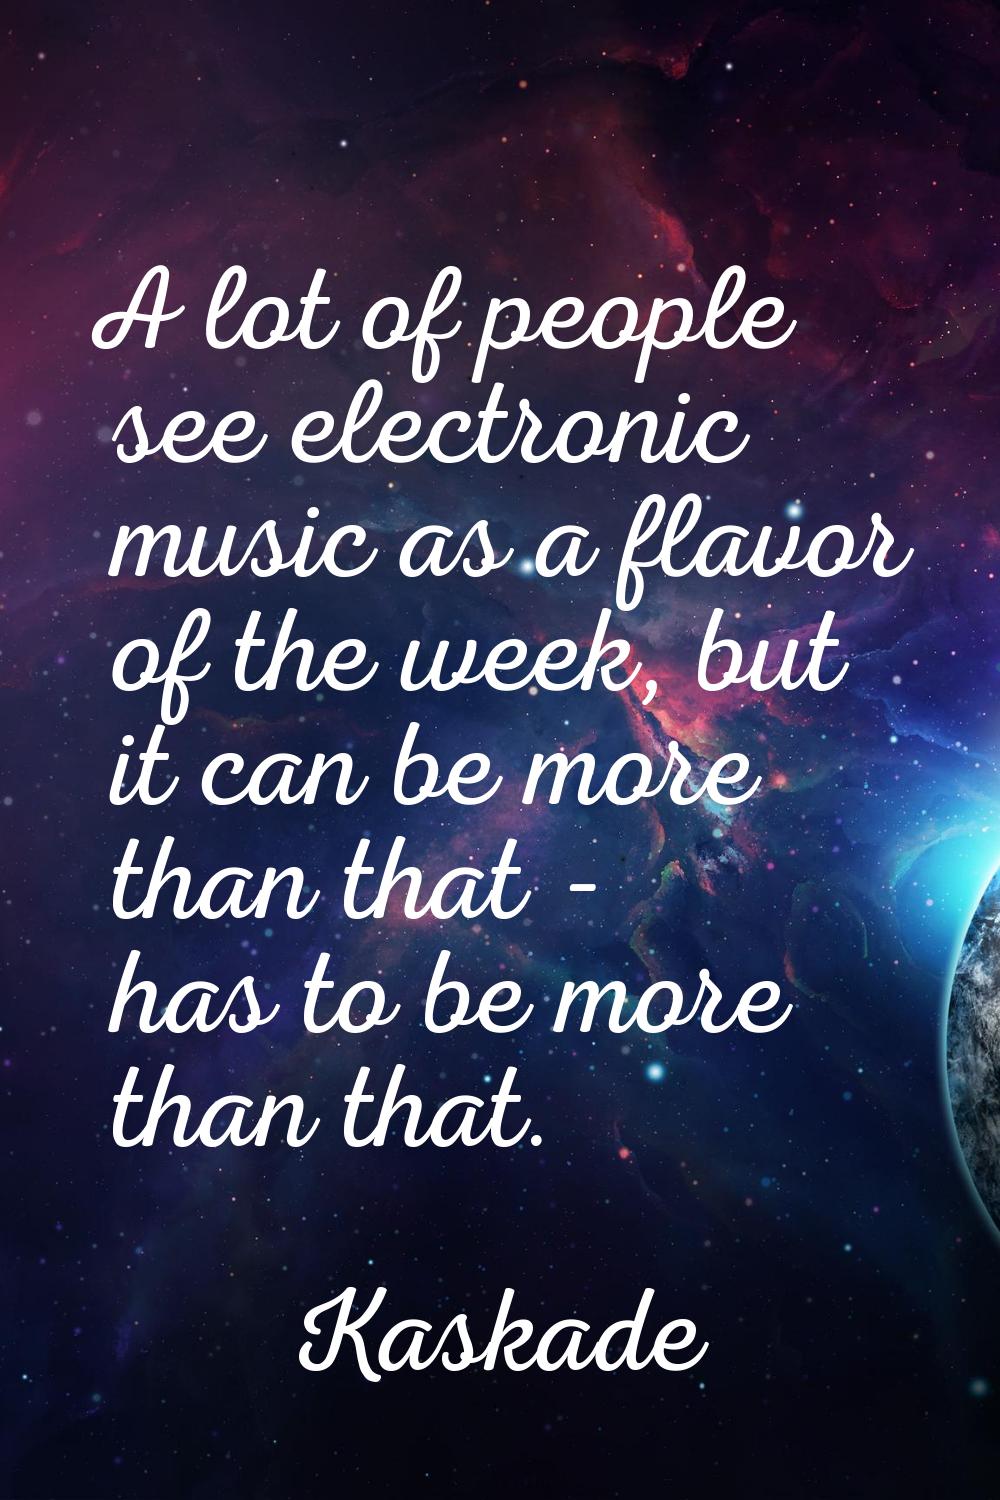 A lot of people see electronic music as a flavor of the week, but it can be more than that - has to